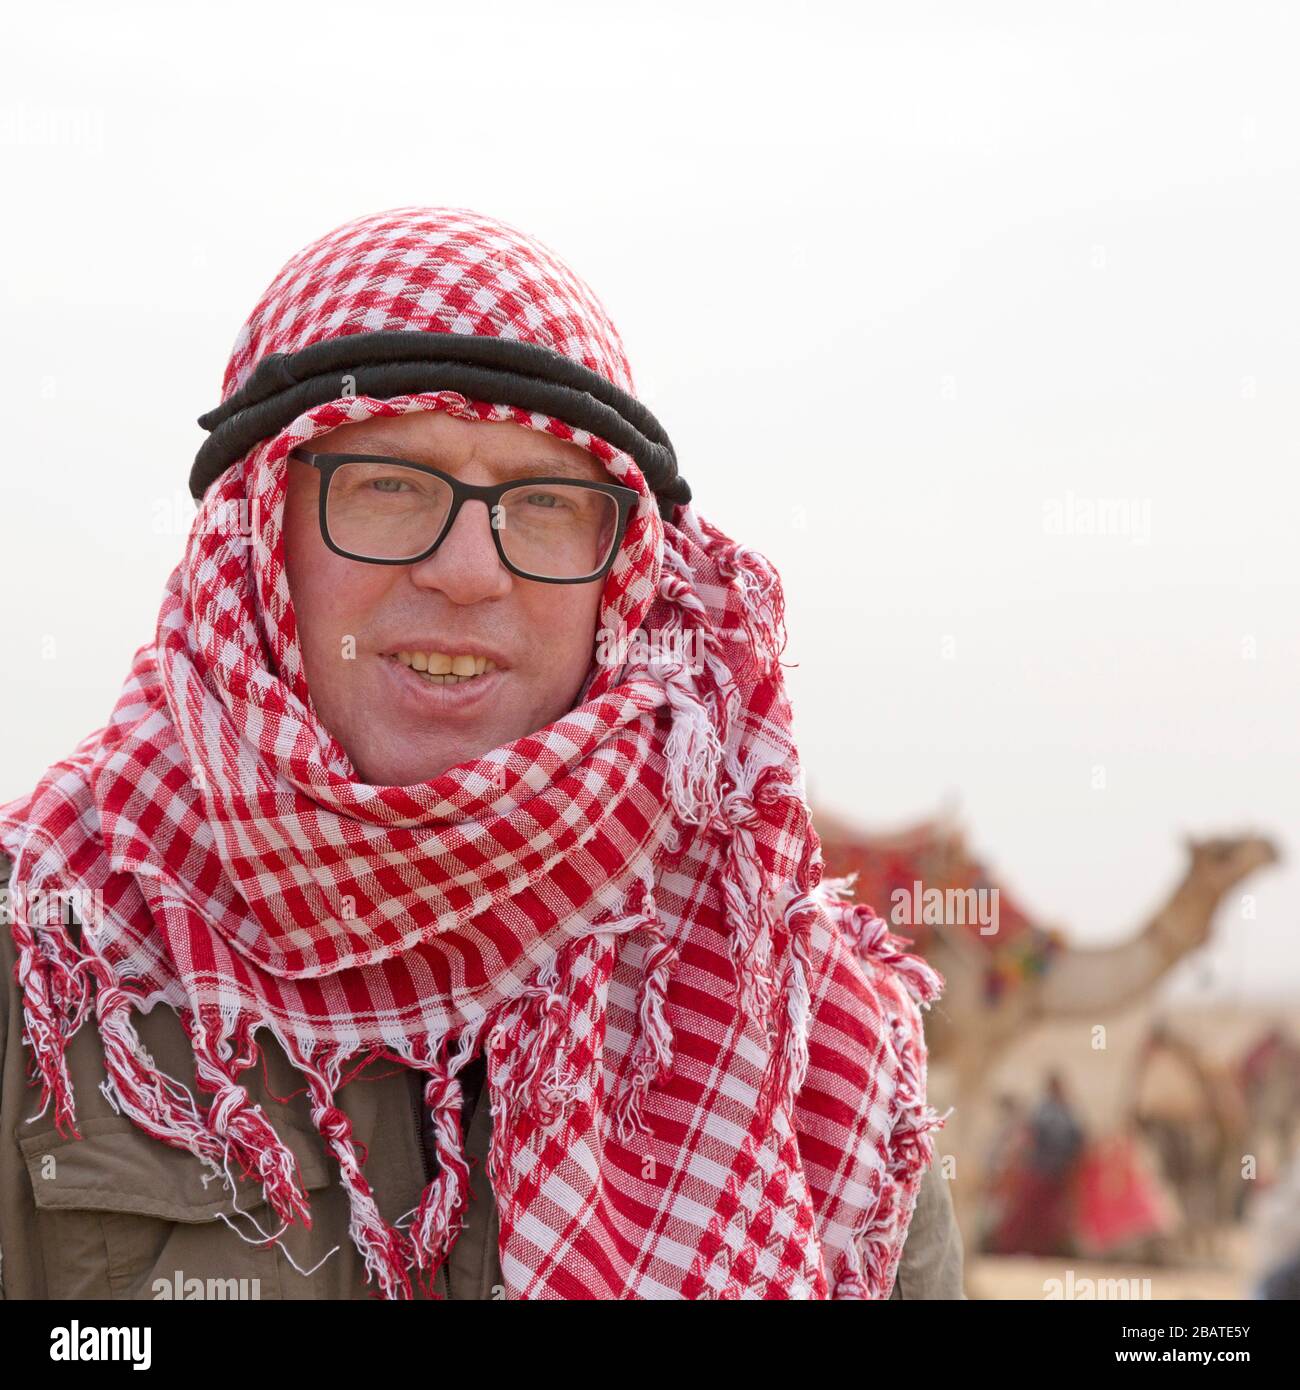 A tourist wearing a traditional Middle-Eastern headdress while visiting the Giza Plateau at Cairo, Egypt. Stock Photo